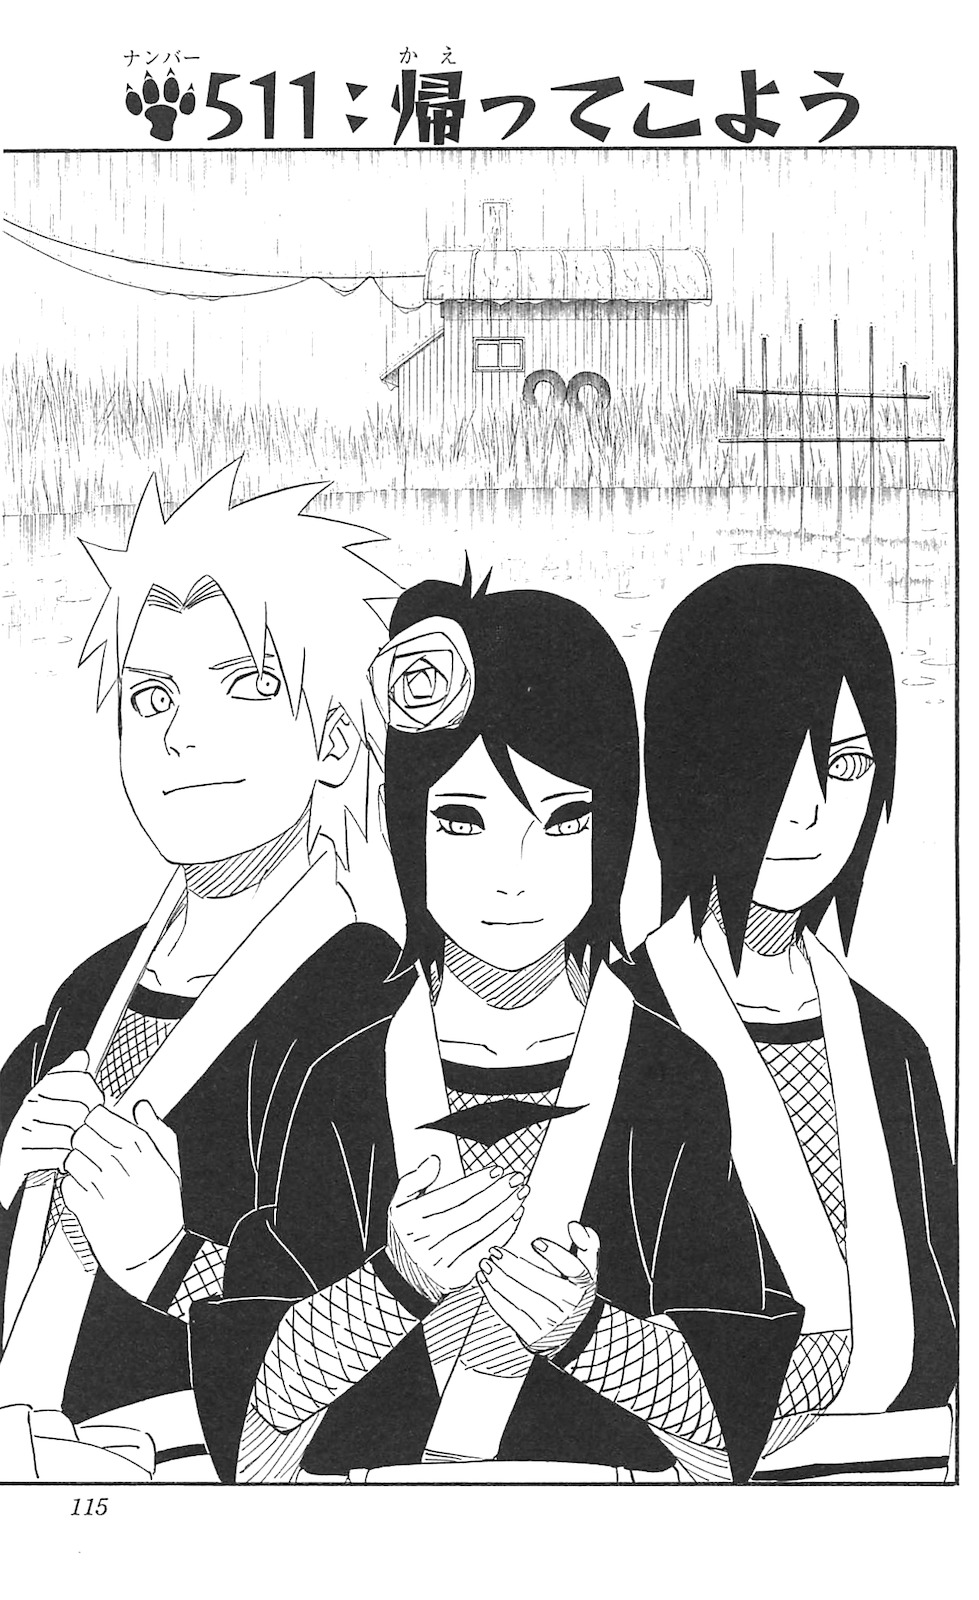 The Lost Page of the Broken Crest - Chapter 3 - neko1998 - Naruto [Archive  of Our Own]